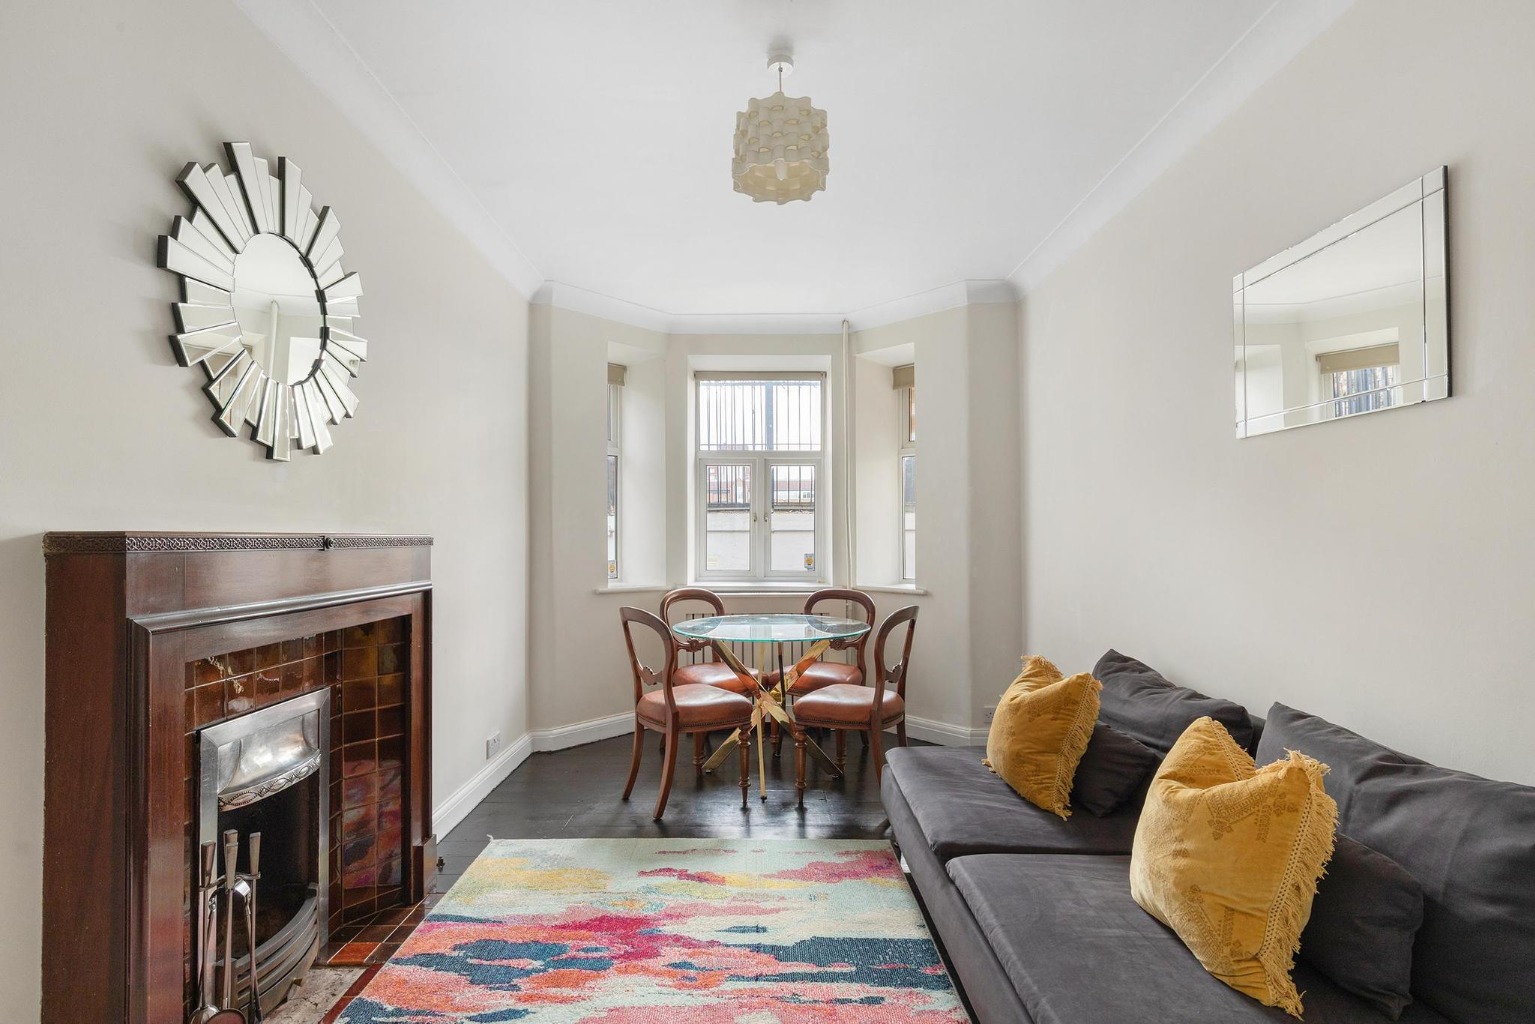 Barons Court Mansions, Gledstanes Road, London, Greater London, W14